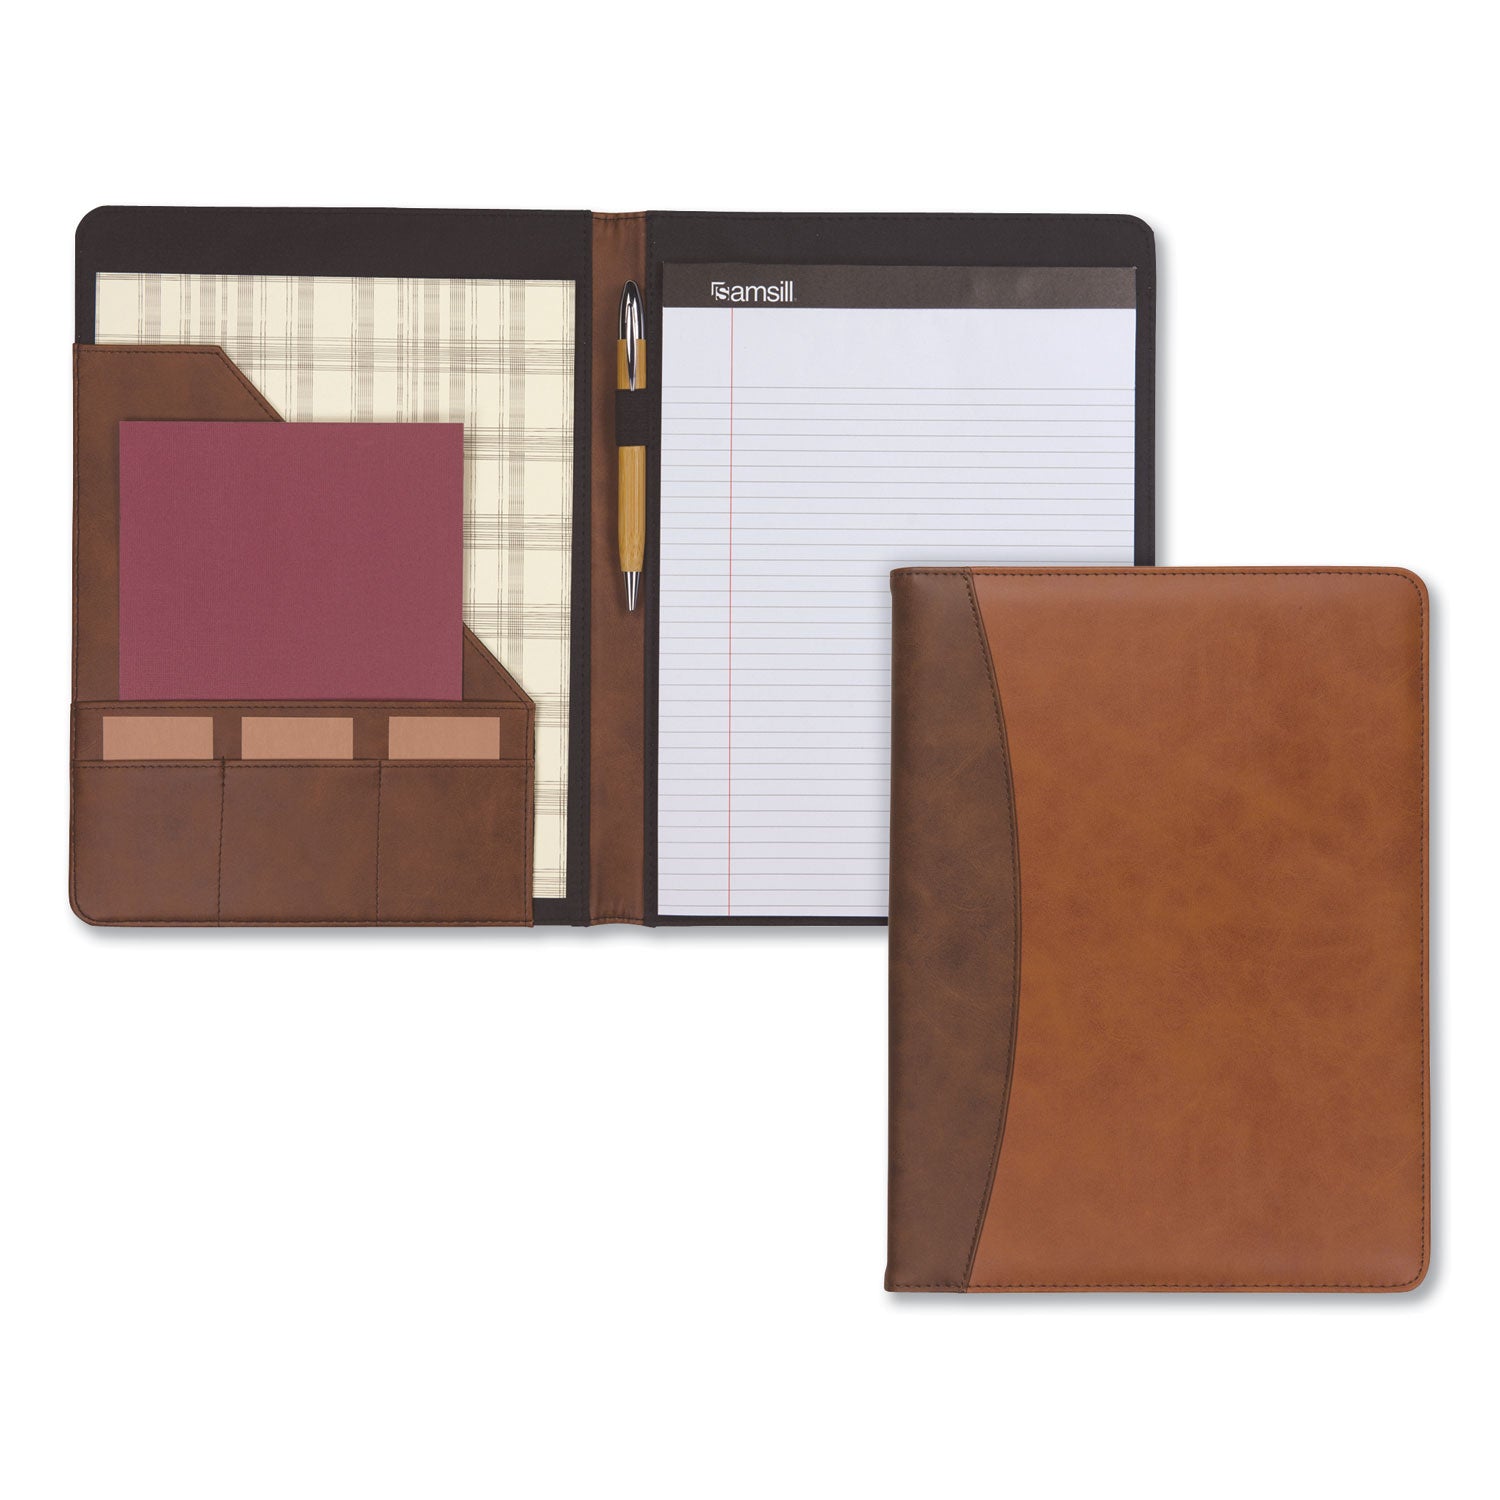 two-tone-padfolio-with-spine-accent-106w-x-1425h-polyurethane-tan-brown_sam71656 - 2